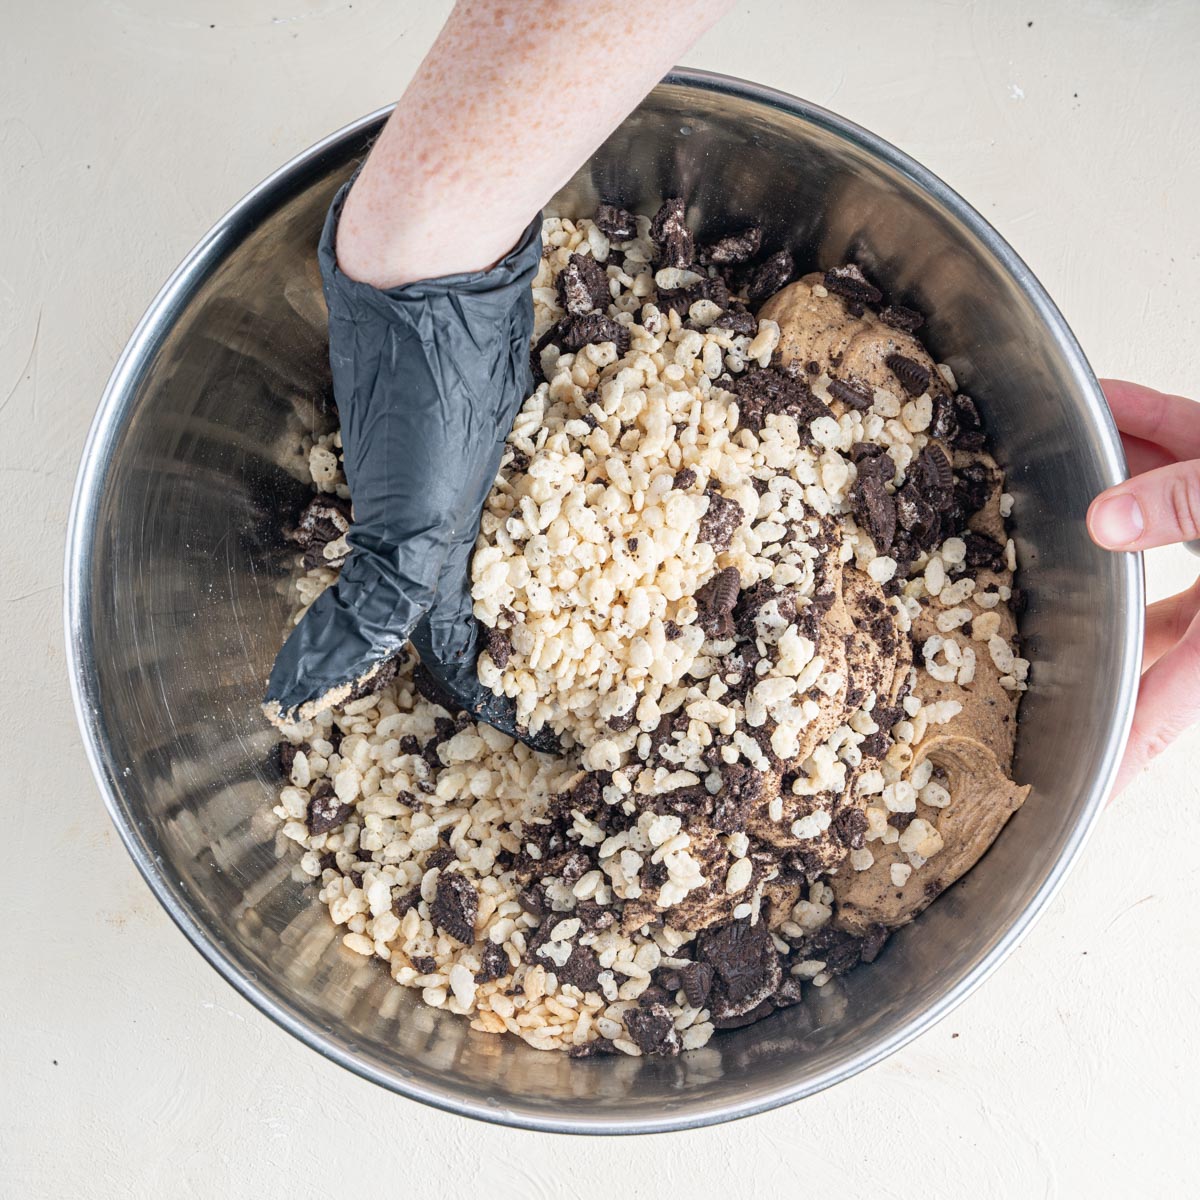 Stirring by hand the ingredients for a cookies and cream protein bar